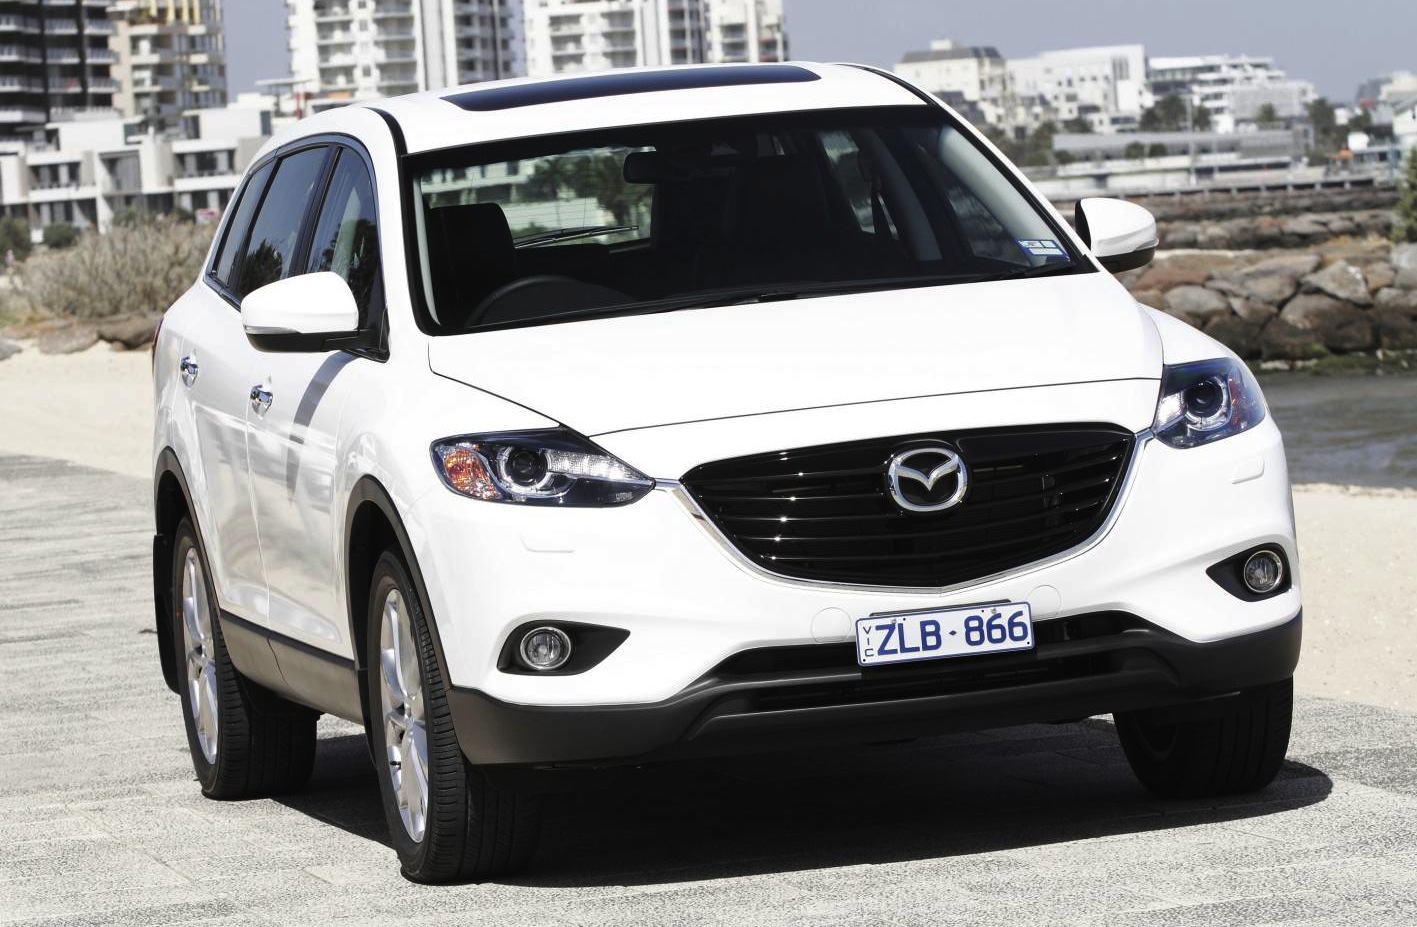 2013 Mazda CX-9 pricing and specifications - Photos (1 of 12)